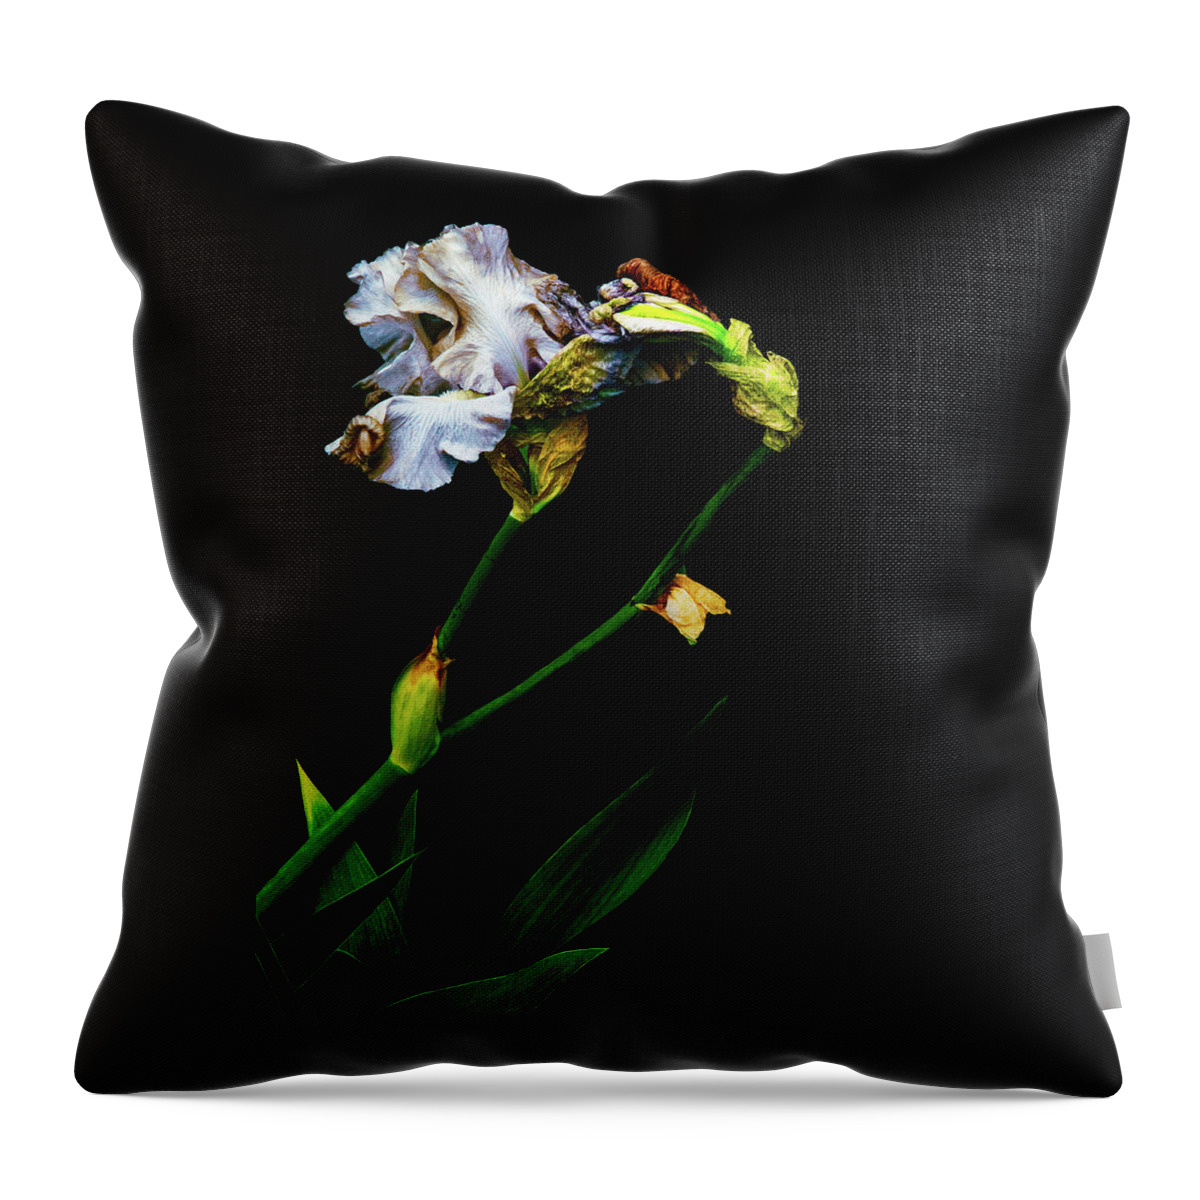 Fine Art Photography Throw Pillow featuring the photograph Penetrate the Magical by Cynthia Dickinson